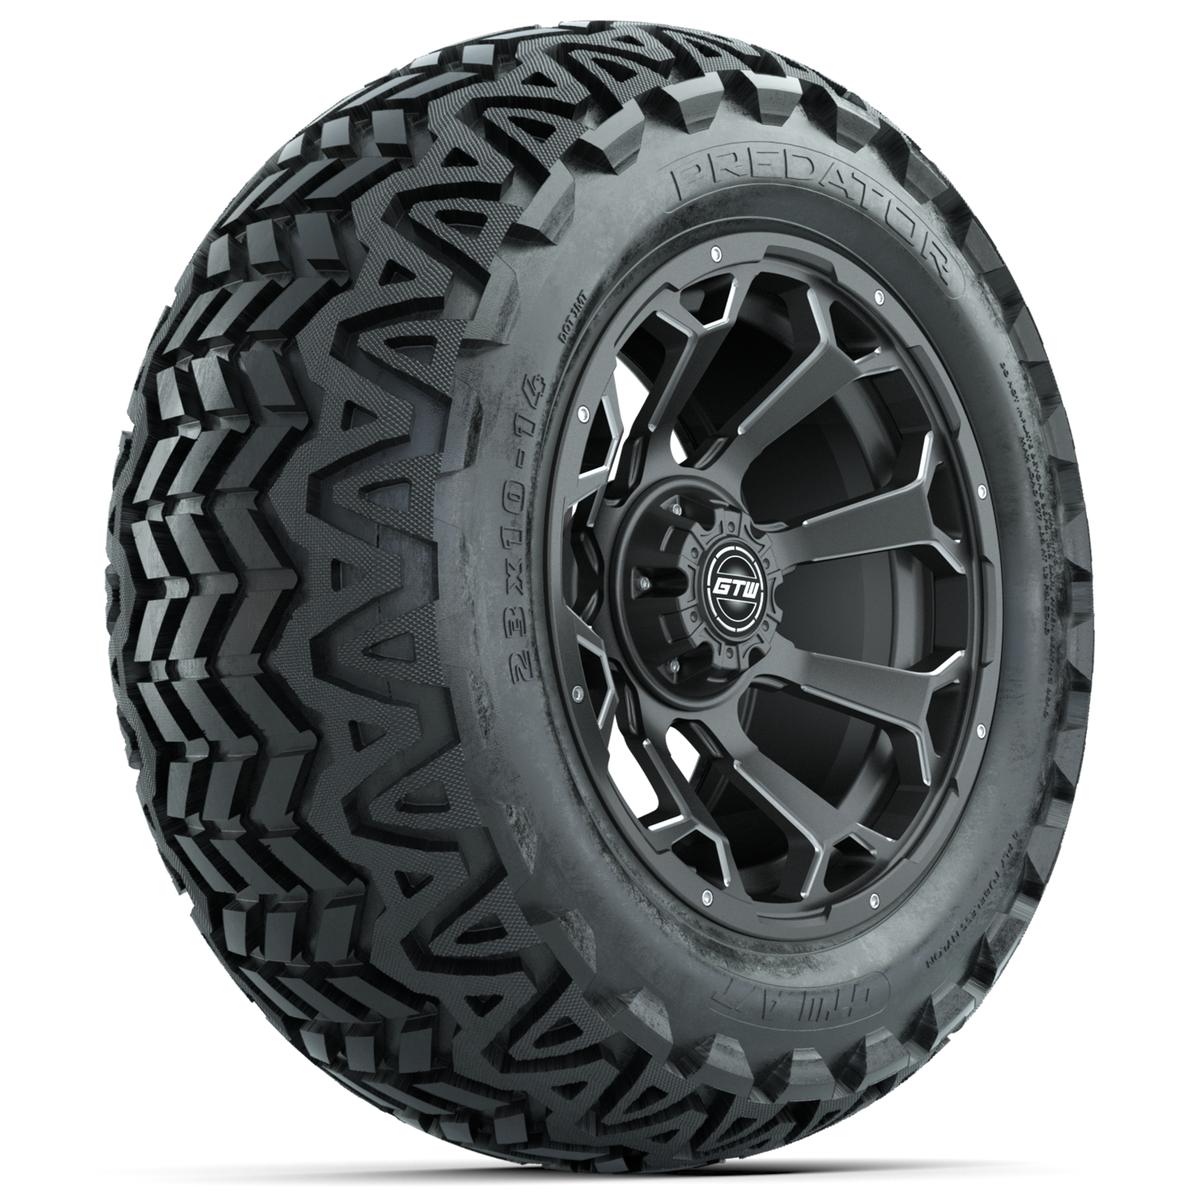 Set of (4) 14 in GTW Raven Wheels with 23x10-14 GTW Predator All-Terrain Tires